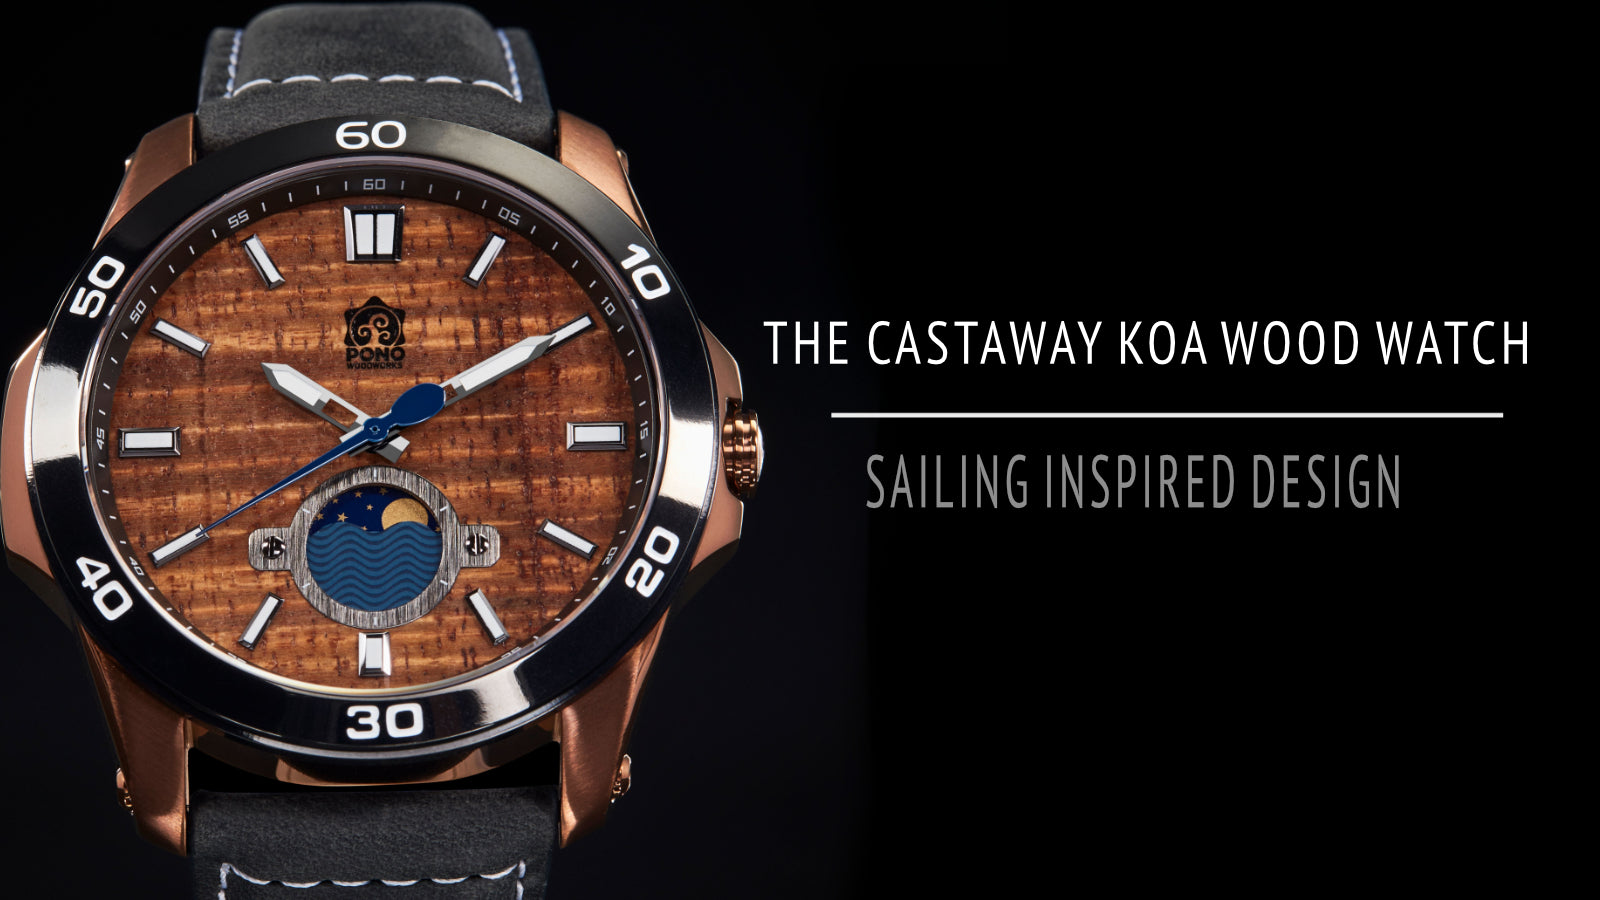 copper color watch with koa wood face black background